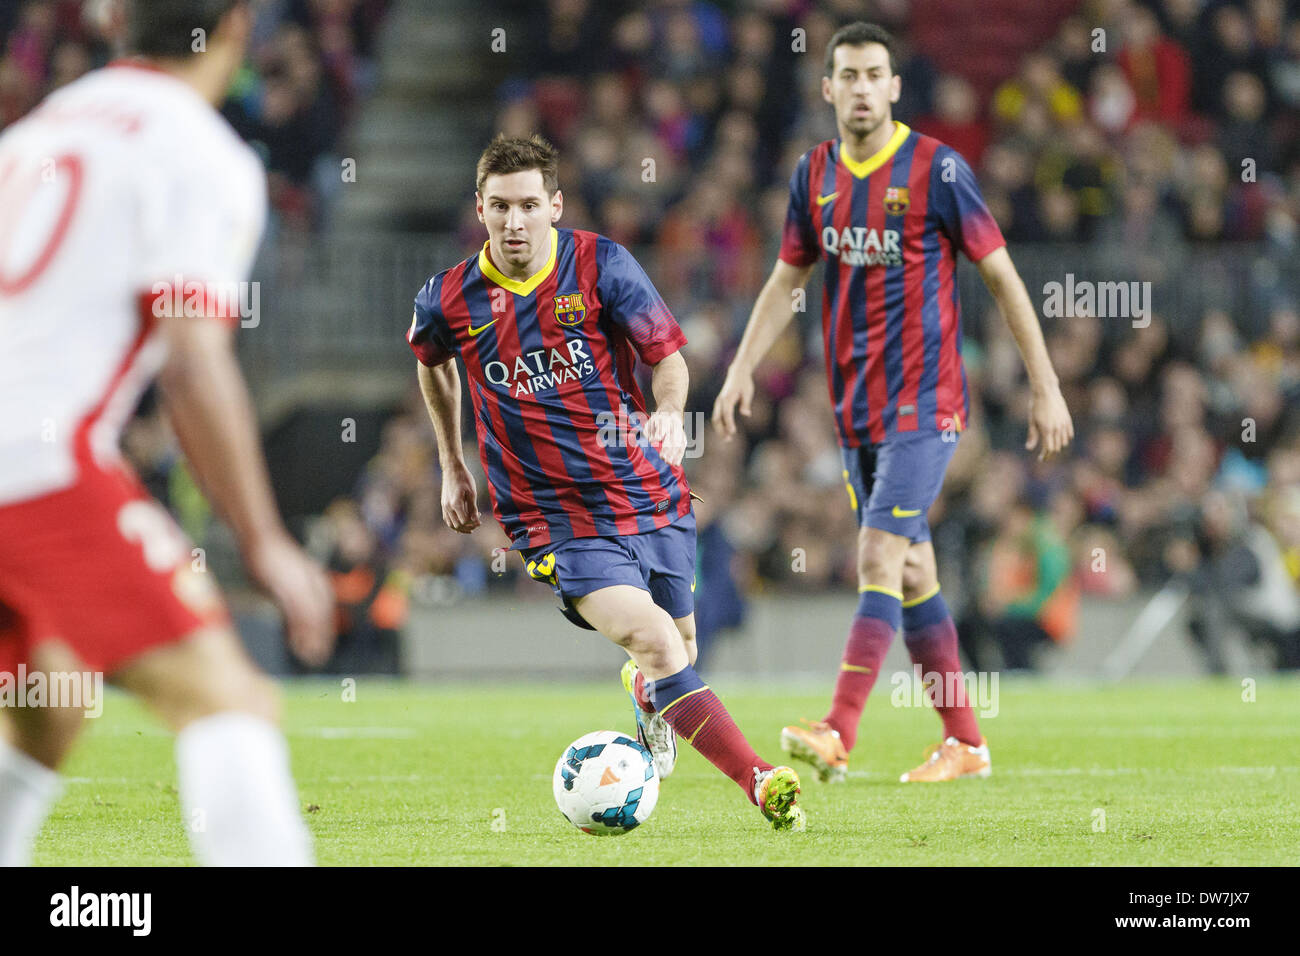 Barcellona, Spain. 2nd Mar, 2014. Leo Messi in the match of the day 26 of the Spanish Liga BBVA between FC Barcelona and U.D. Almeria, played at the Camp Nou stadium, the march 02, 2014. Credit:  Urbanandsport/NurPhoto/ZUMAPRESS.com/Alamy Live News Stock Photo